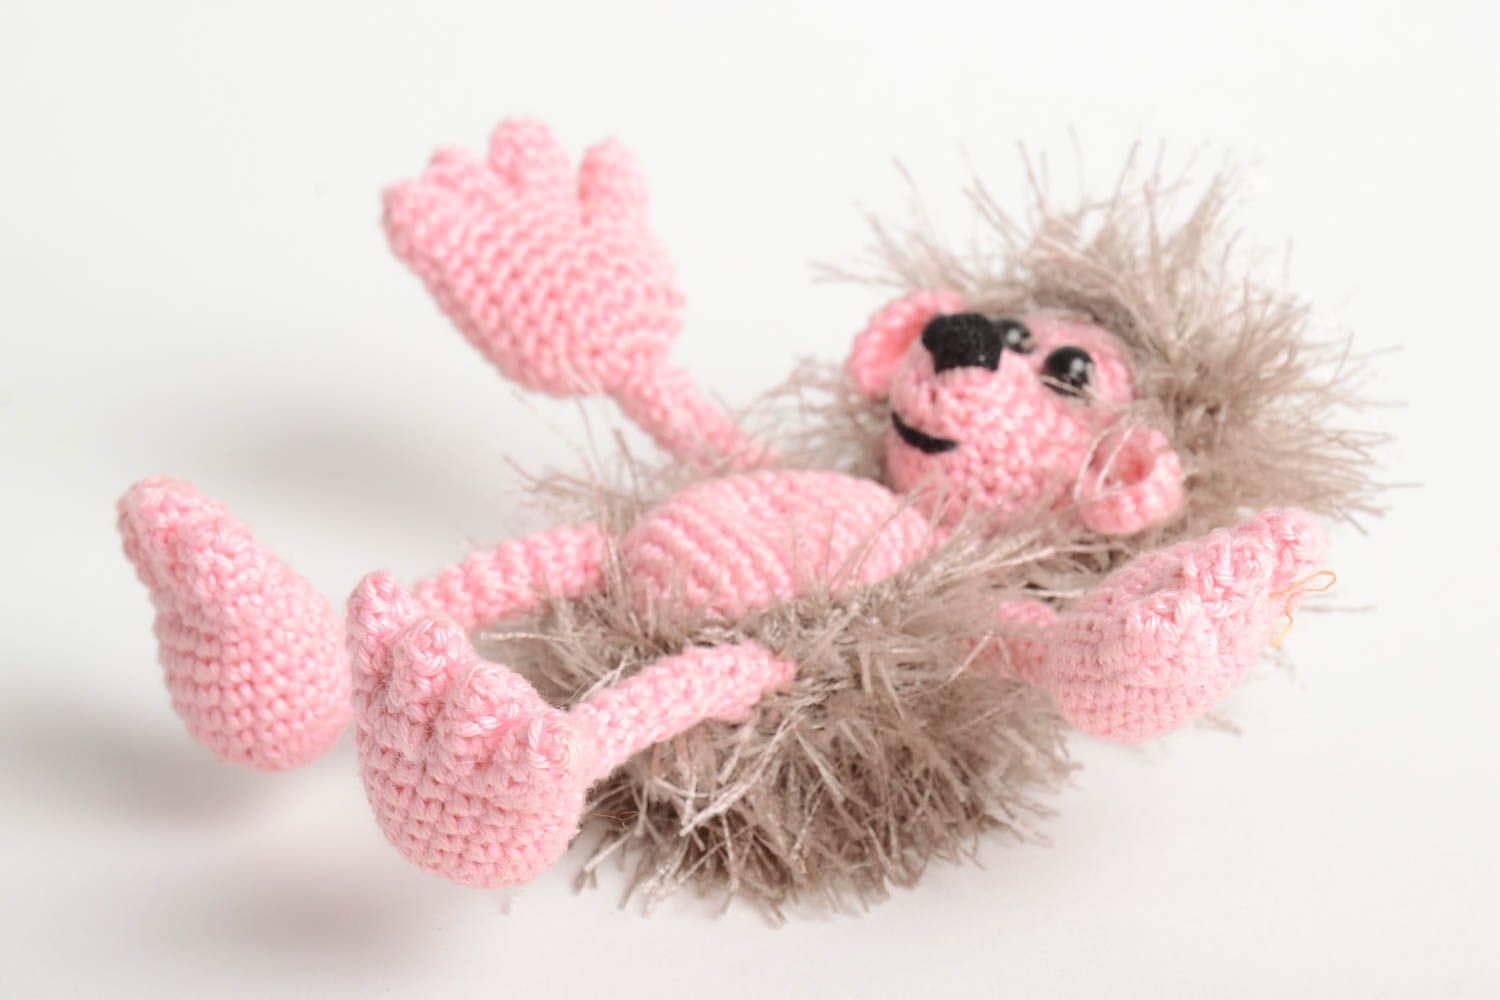 Handmade crocheted toy stylish unusual toy for kids funny hedgehog toy photo 4